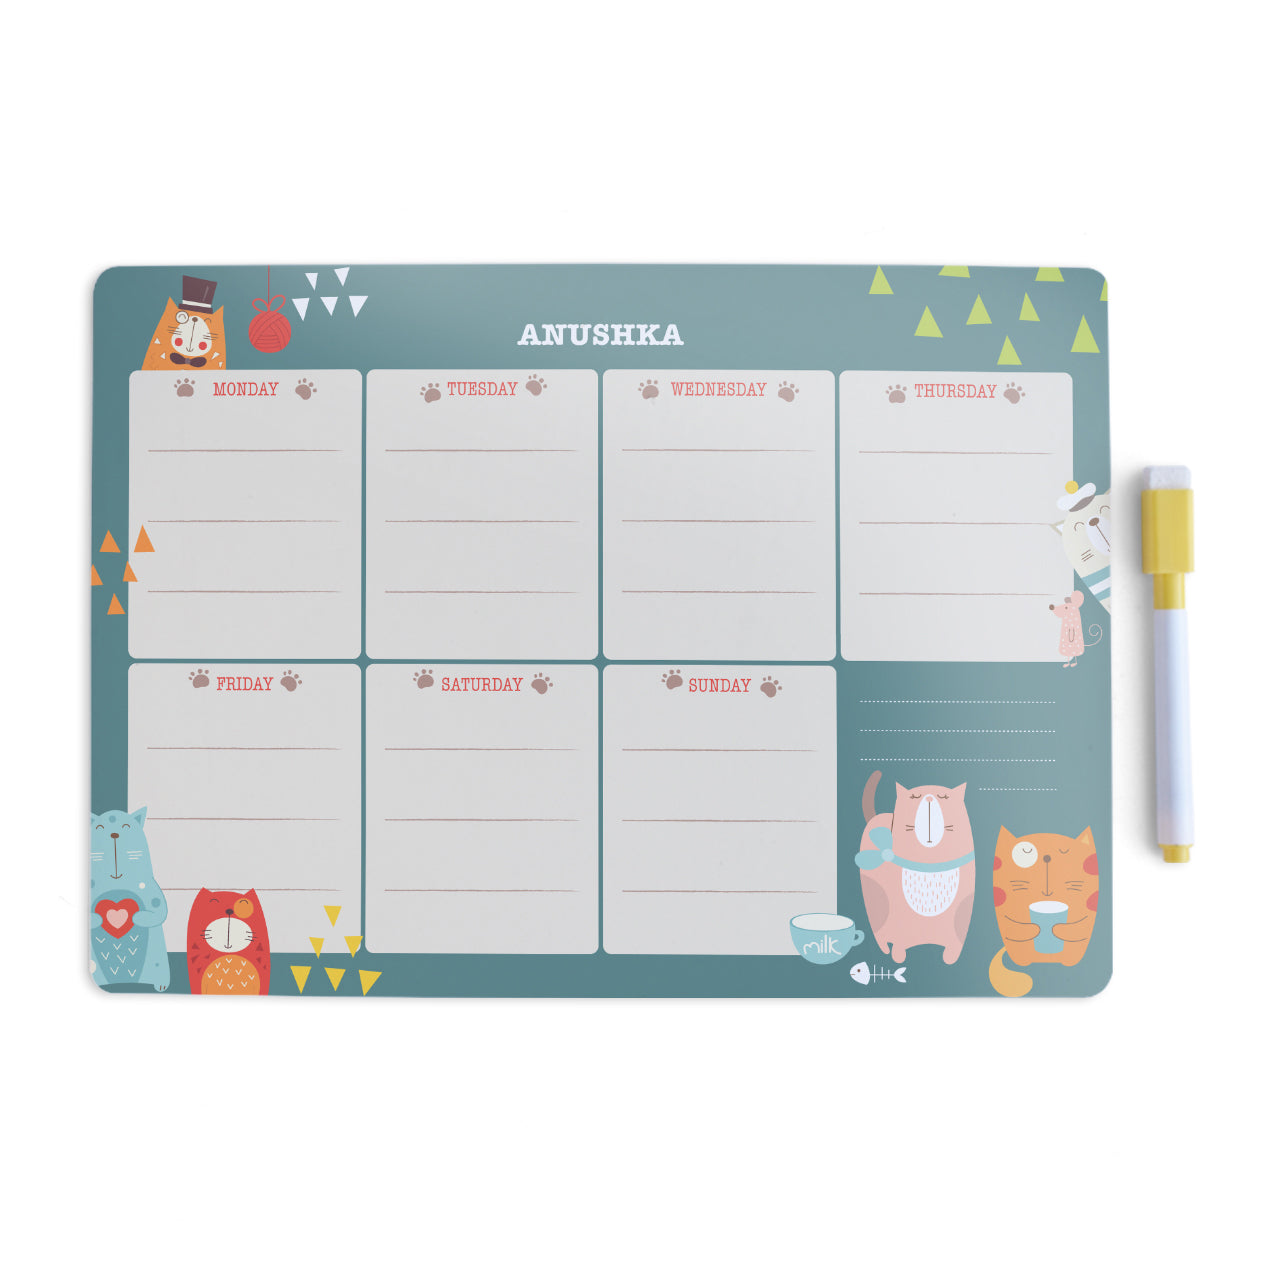 Personalised Meal / Weekly Planner - Kitty Cat